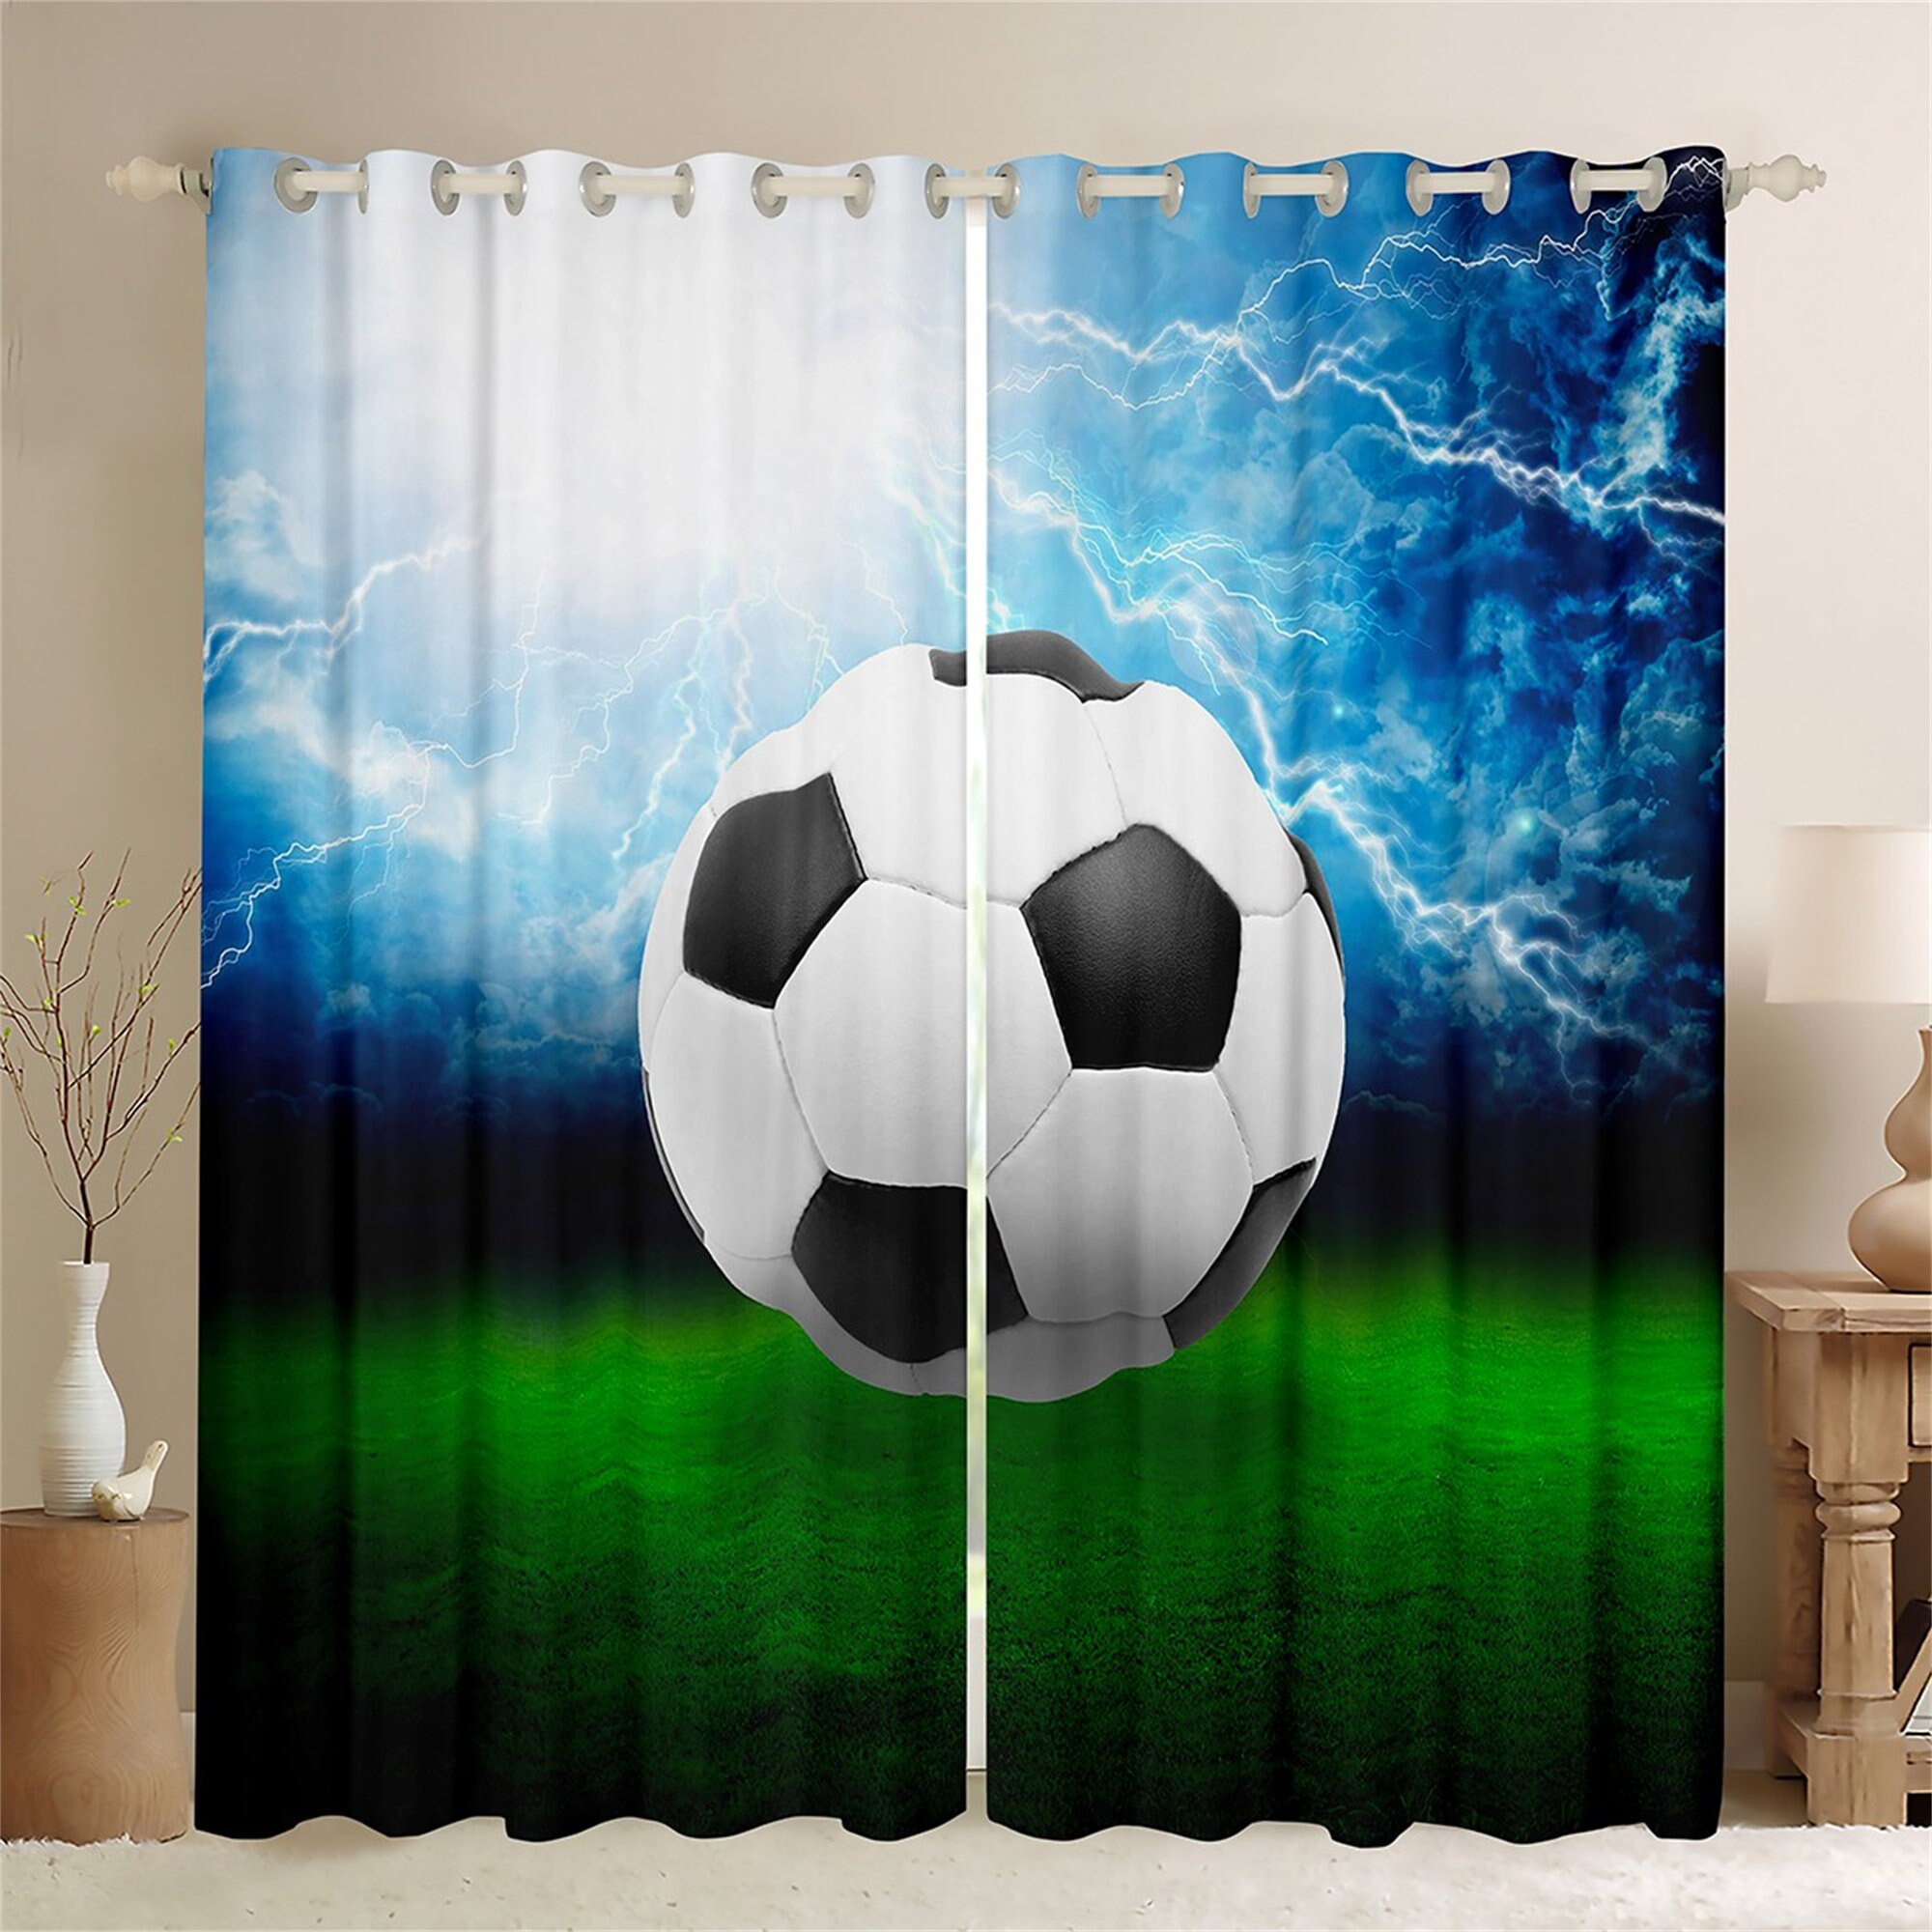 Erosebridal Blue Camo Curtains American Football Window Curtains for Kids  Boys Teens Men, Sports Games Rugby Blackout Curtains 52 Wx84 L, Camouflage